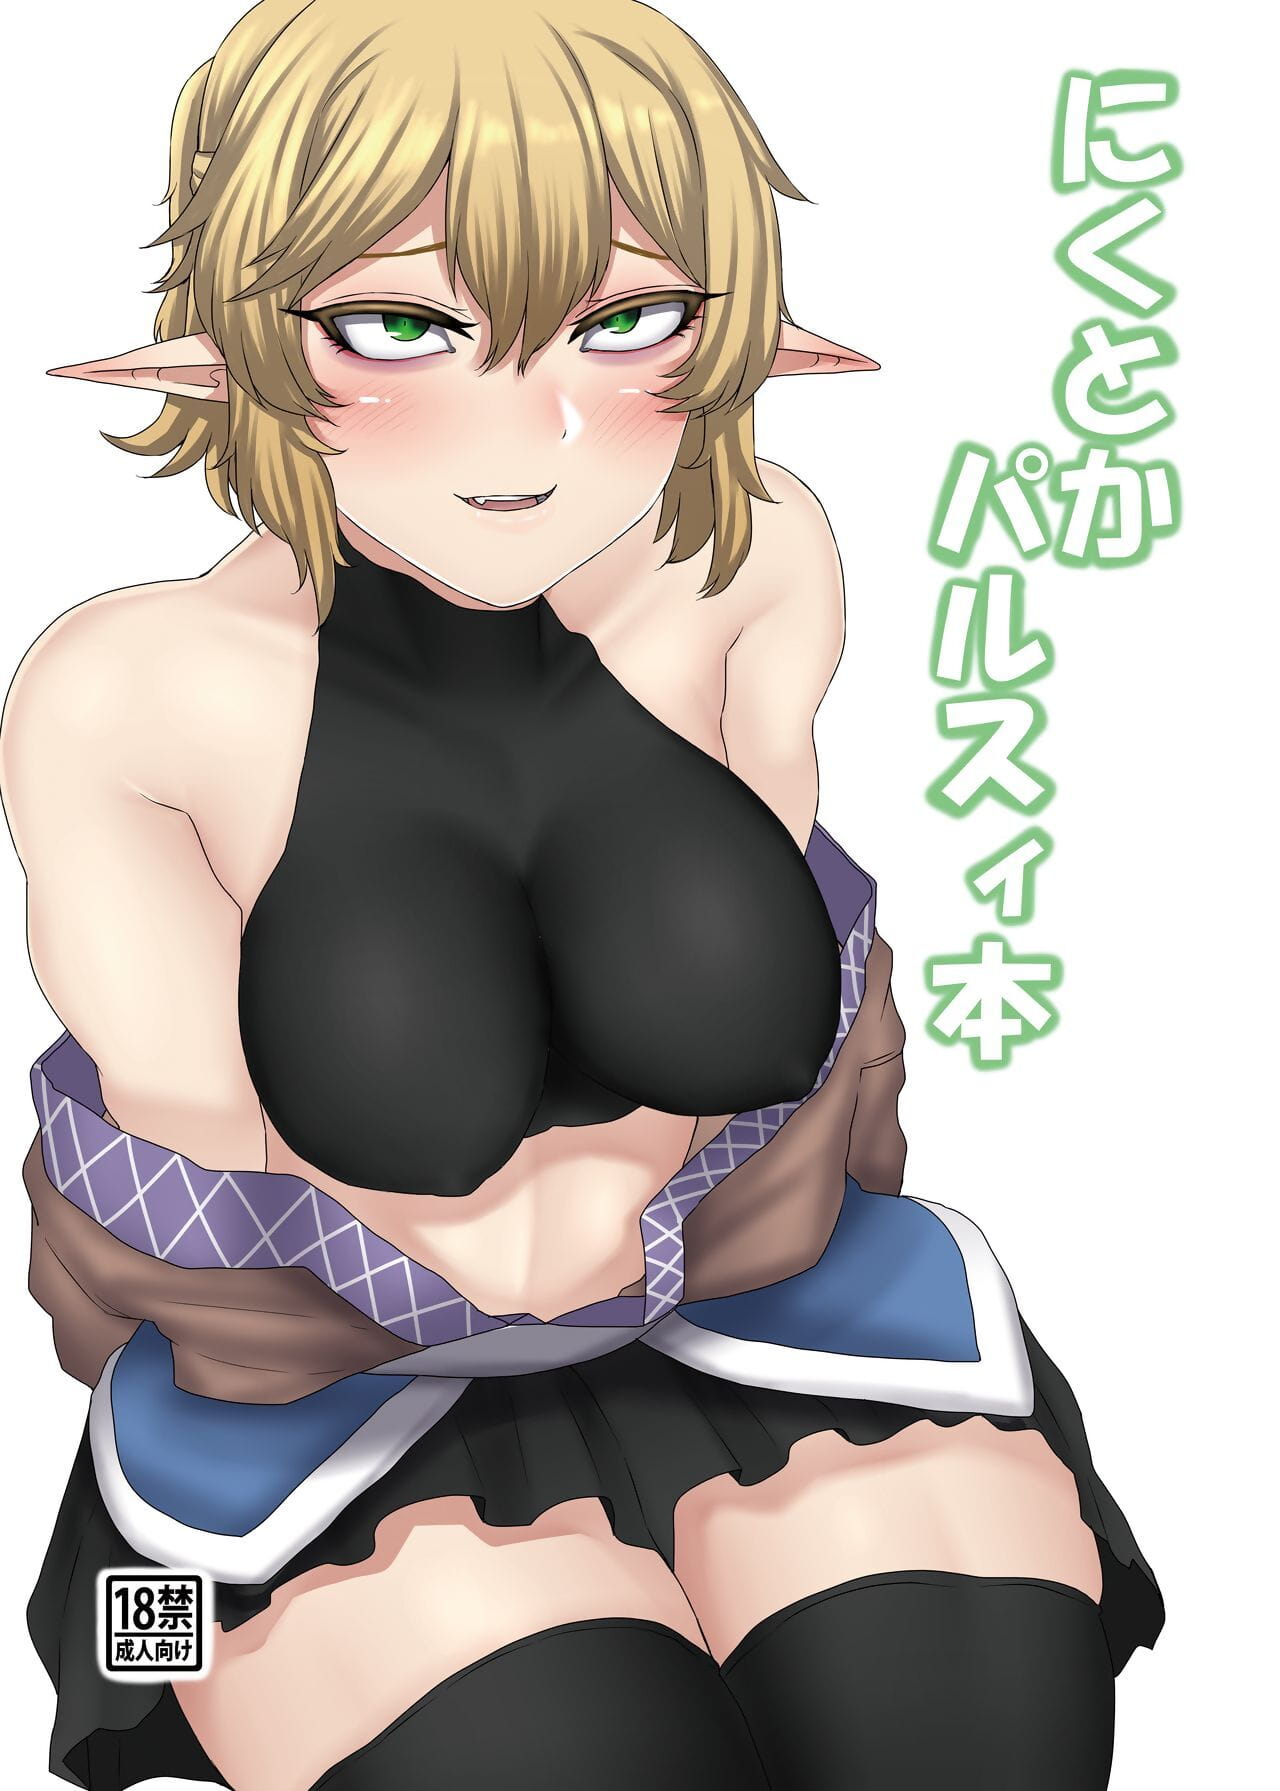 parsee お盆 page 1